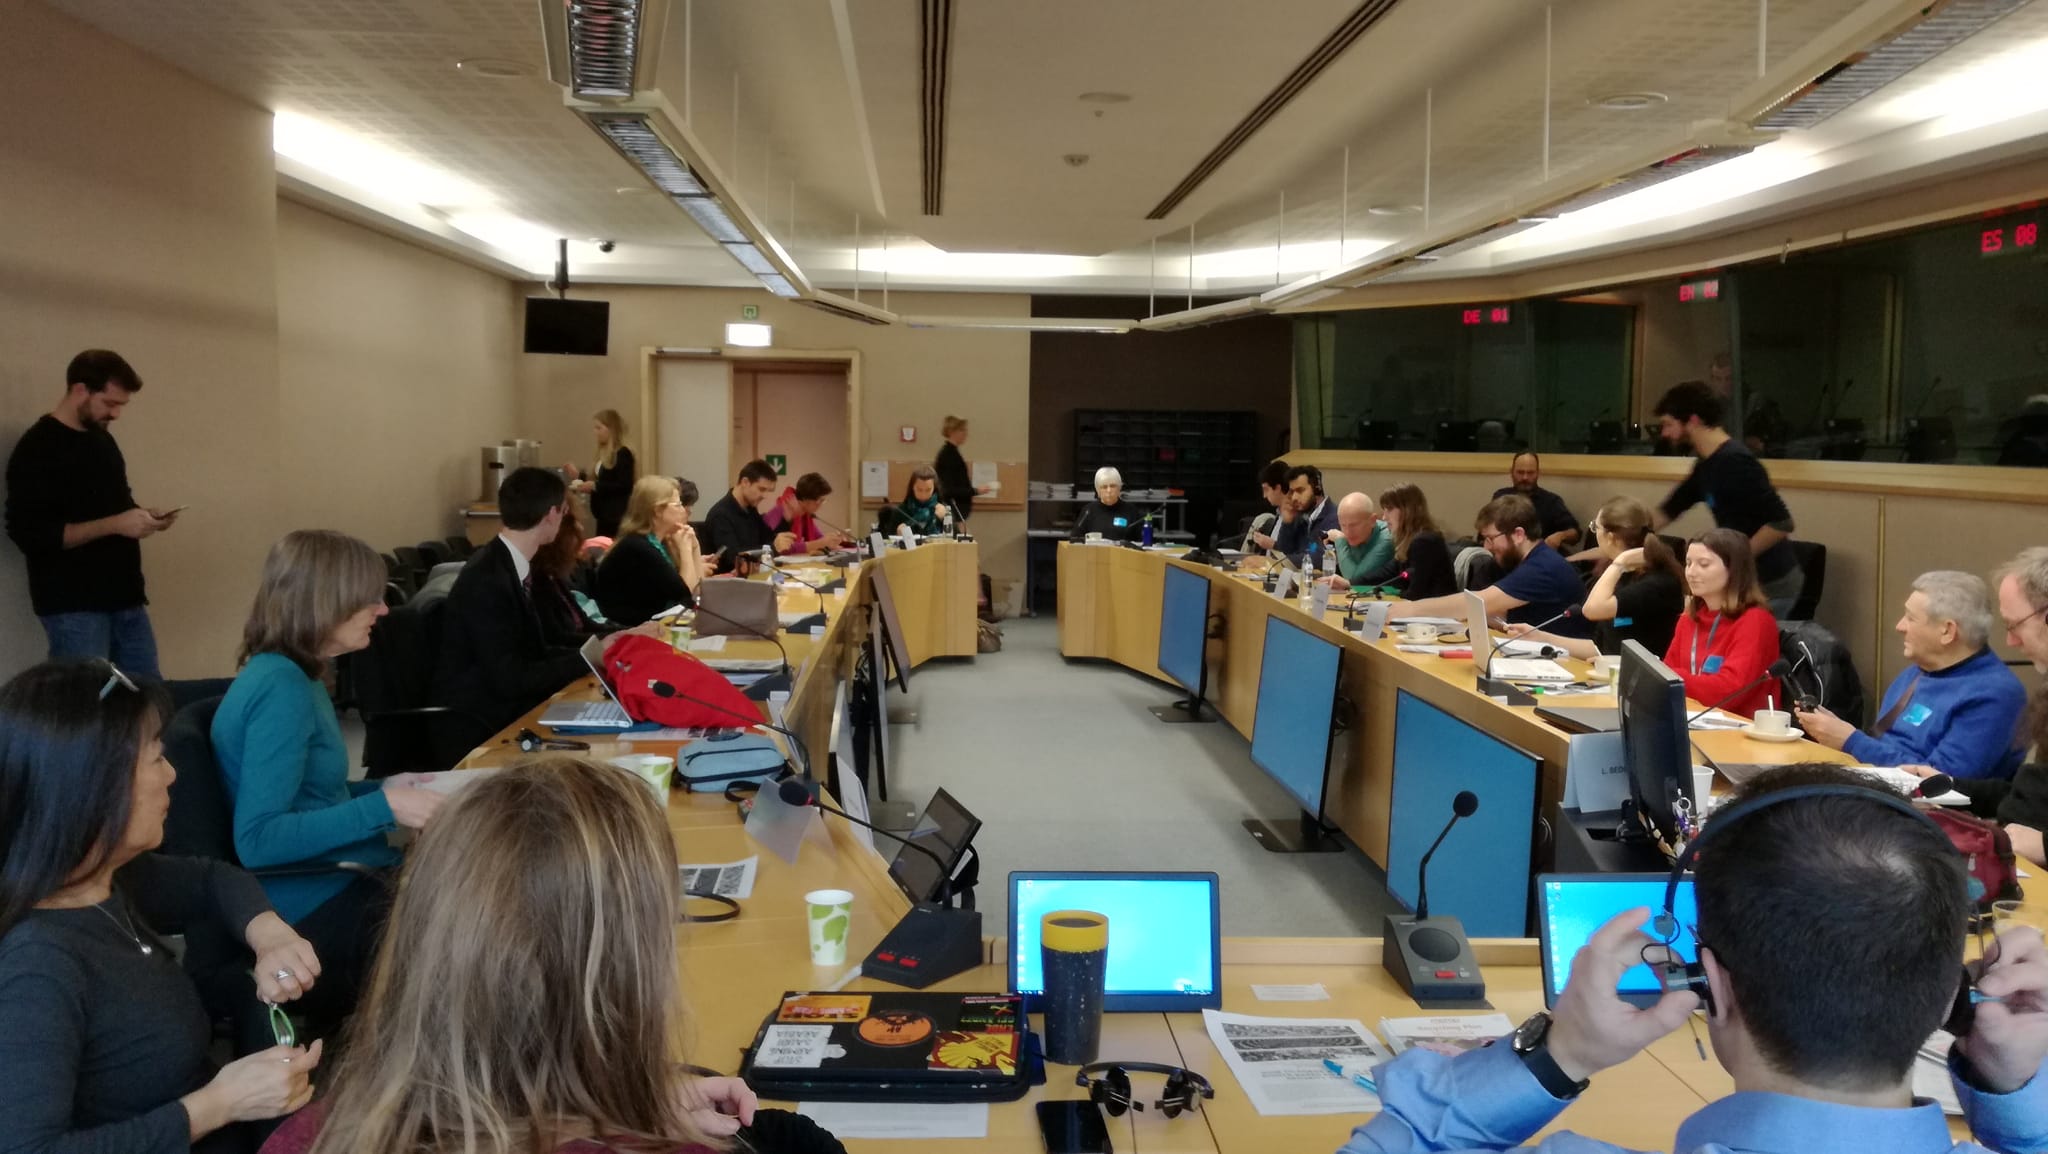 The Delàs Center organizes a Workshop in the European Parliament to discuss European security and defense